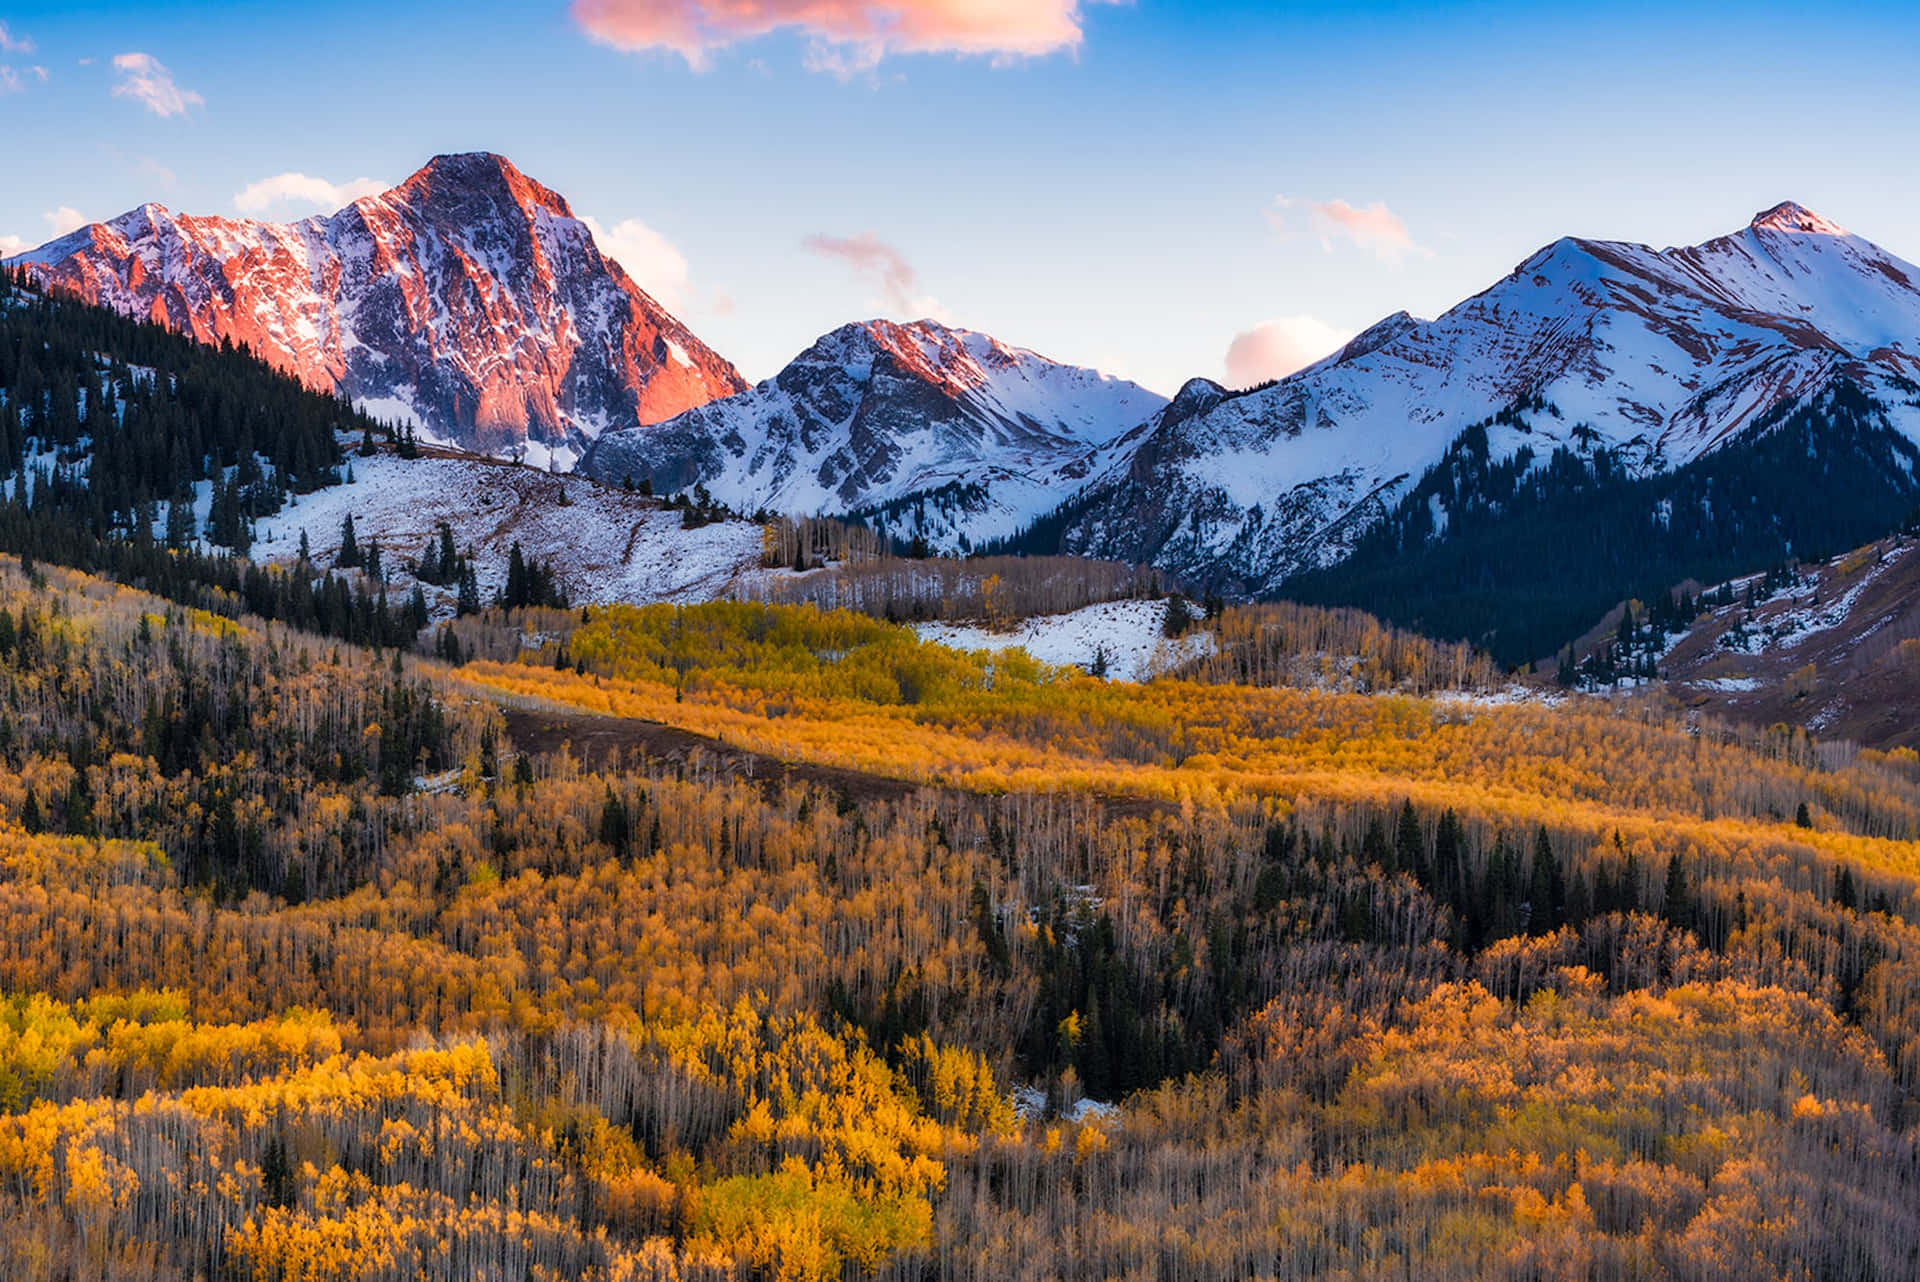 A Mountain Range With Trees And Mountains In The Fall